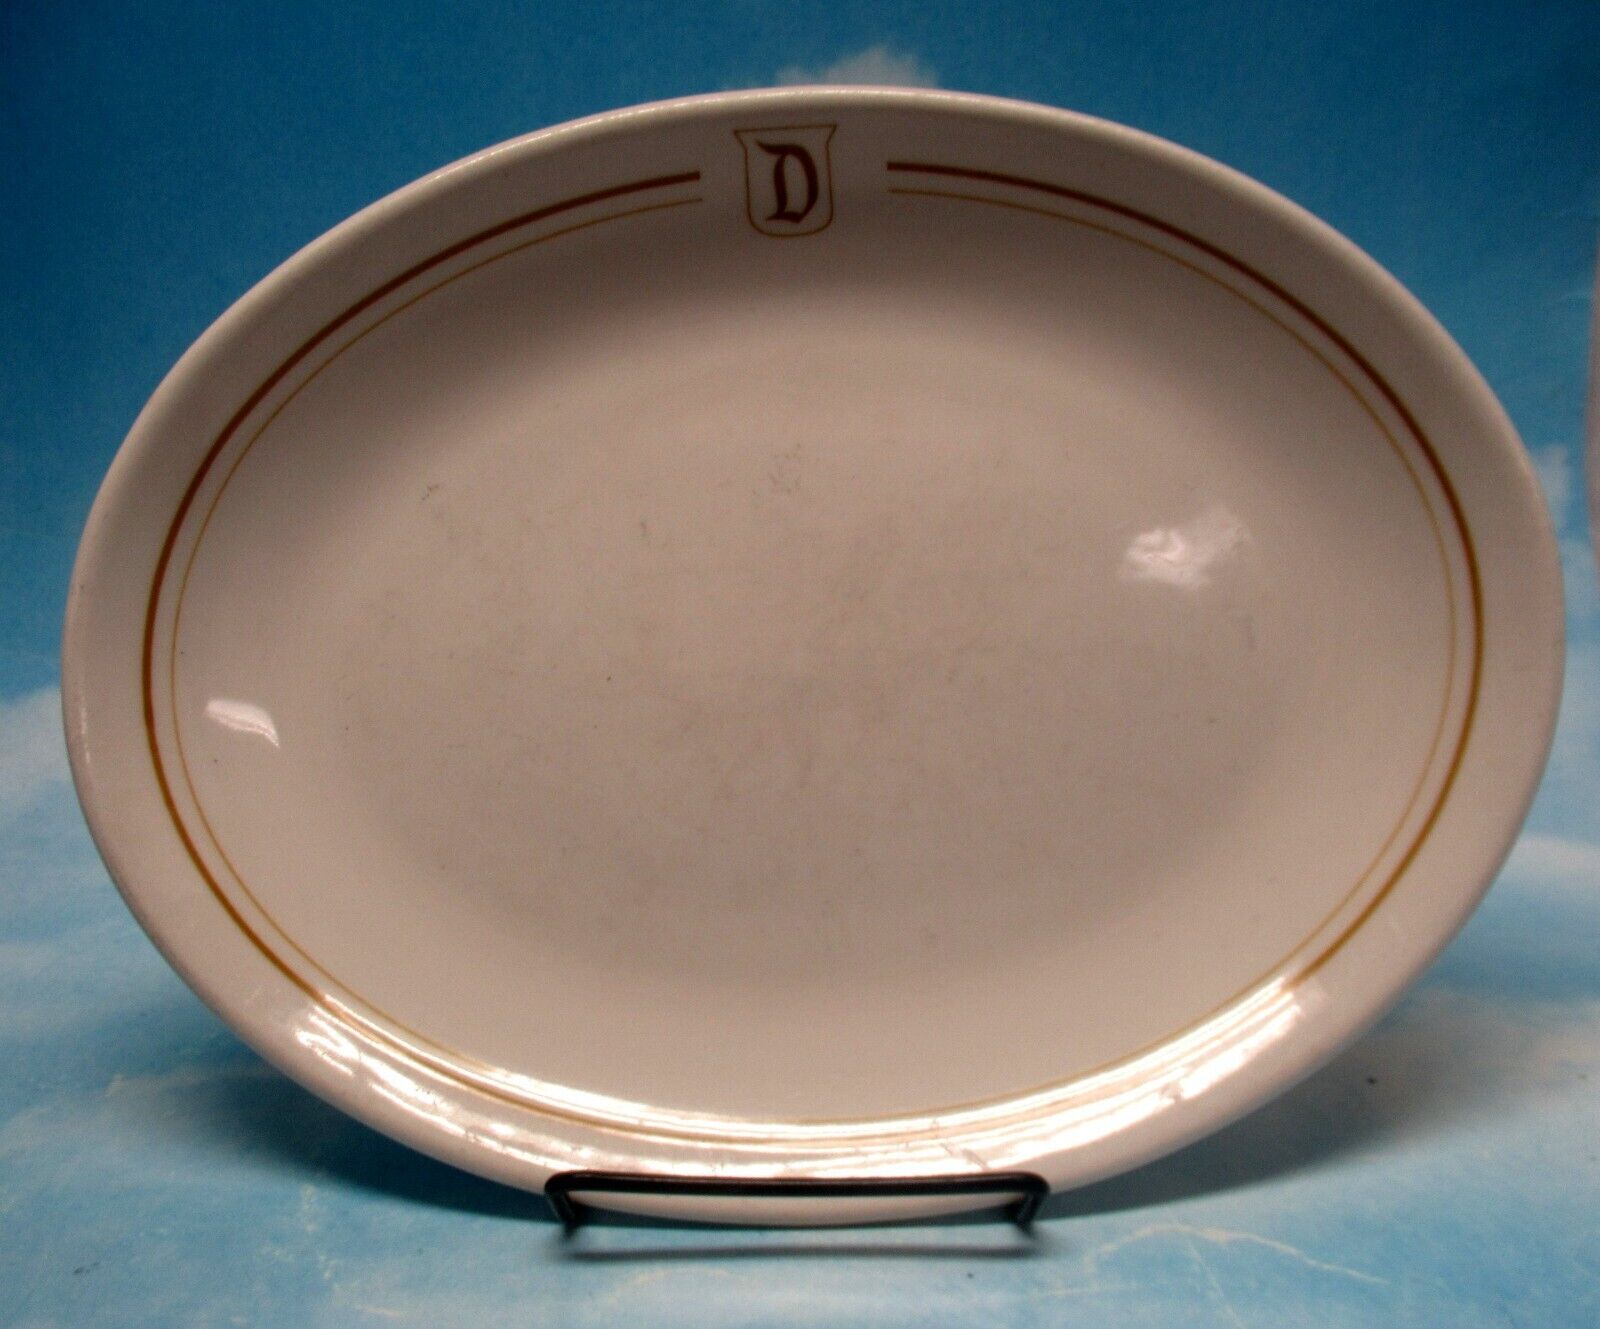 Early DISNEY restaurant ware plate OLD D IN SHIELD LOGO Homer Laughlin Impressed